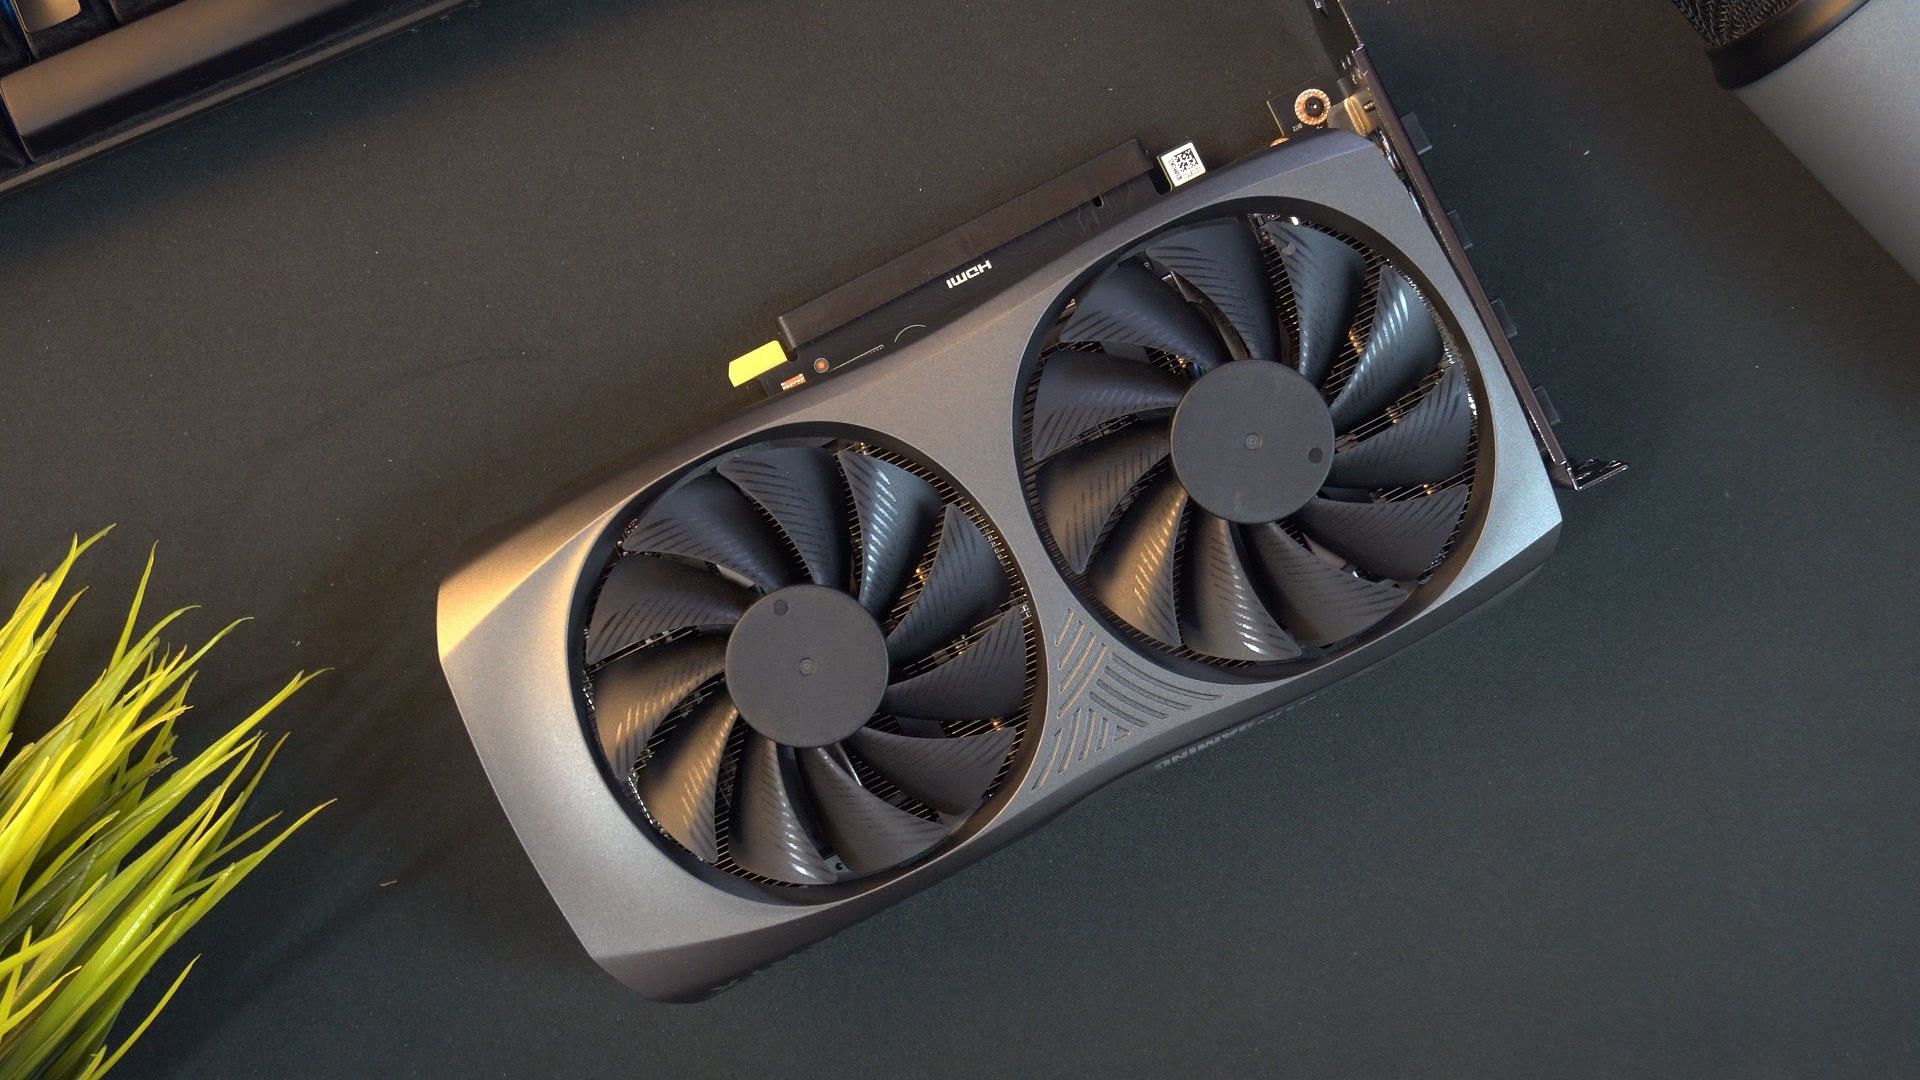 The Zotac Twin Edge OC cards have received a design refresh this generation (Image via Sportskeeda)